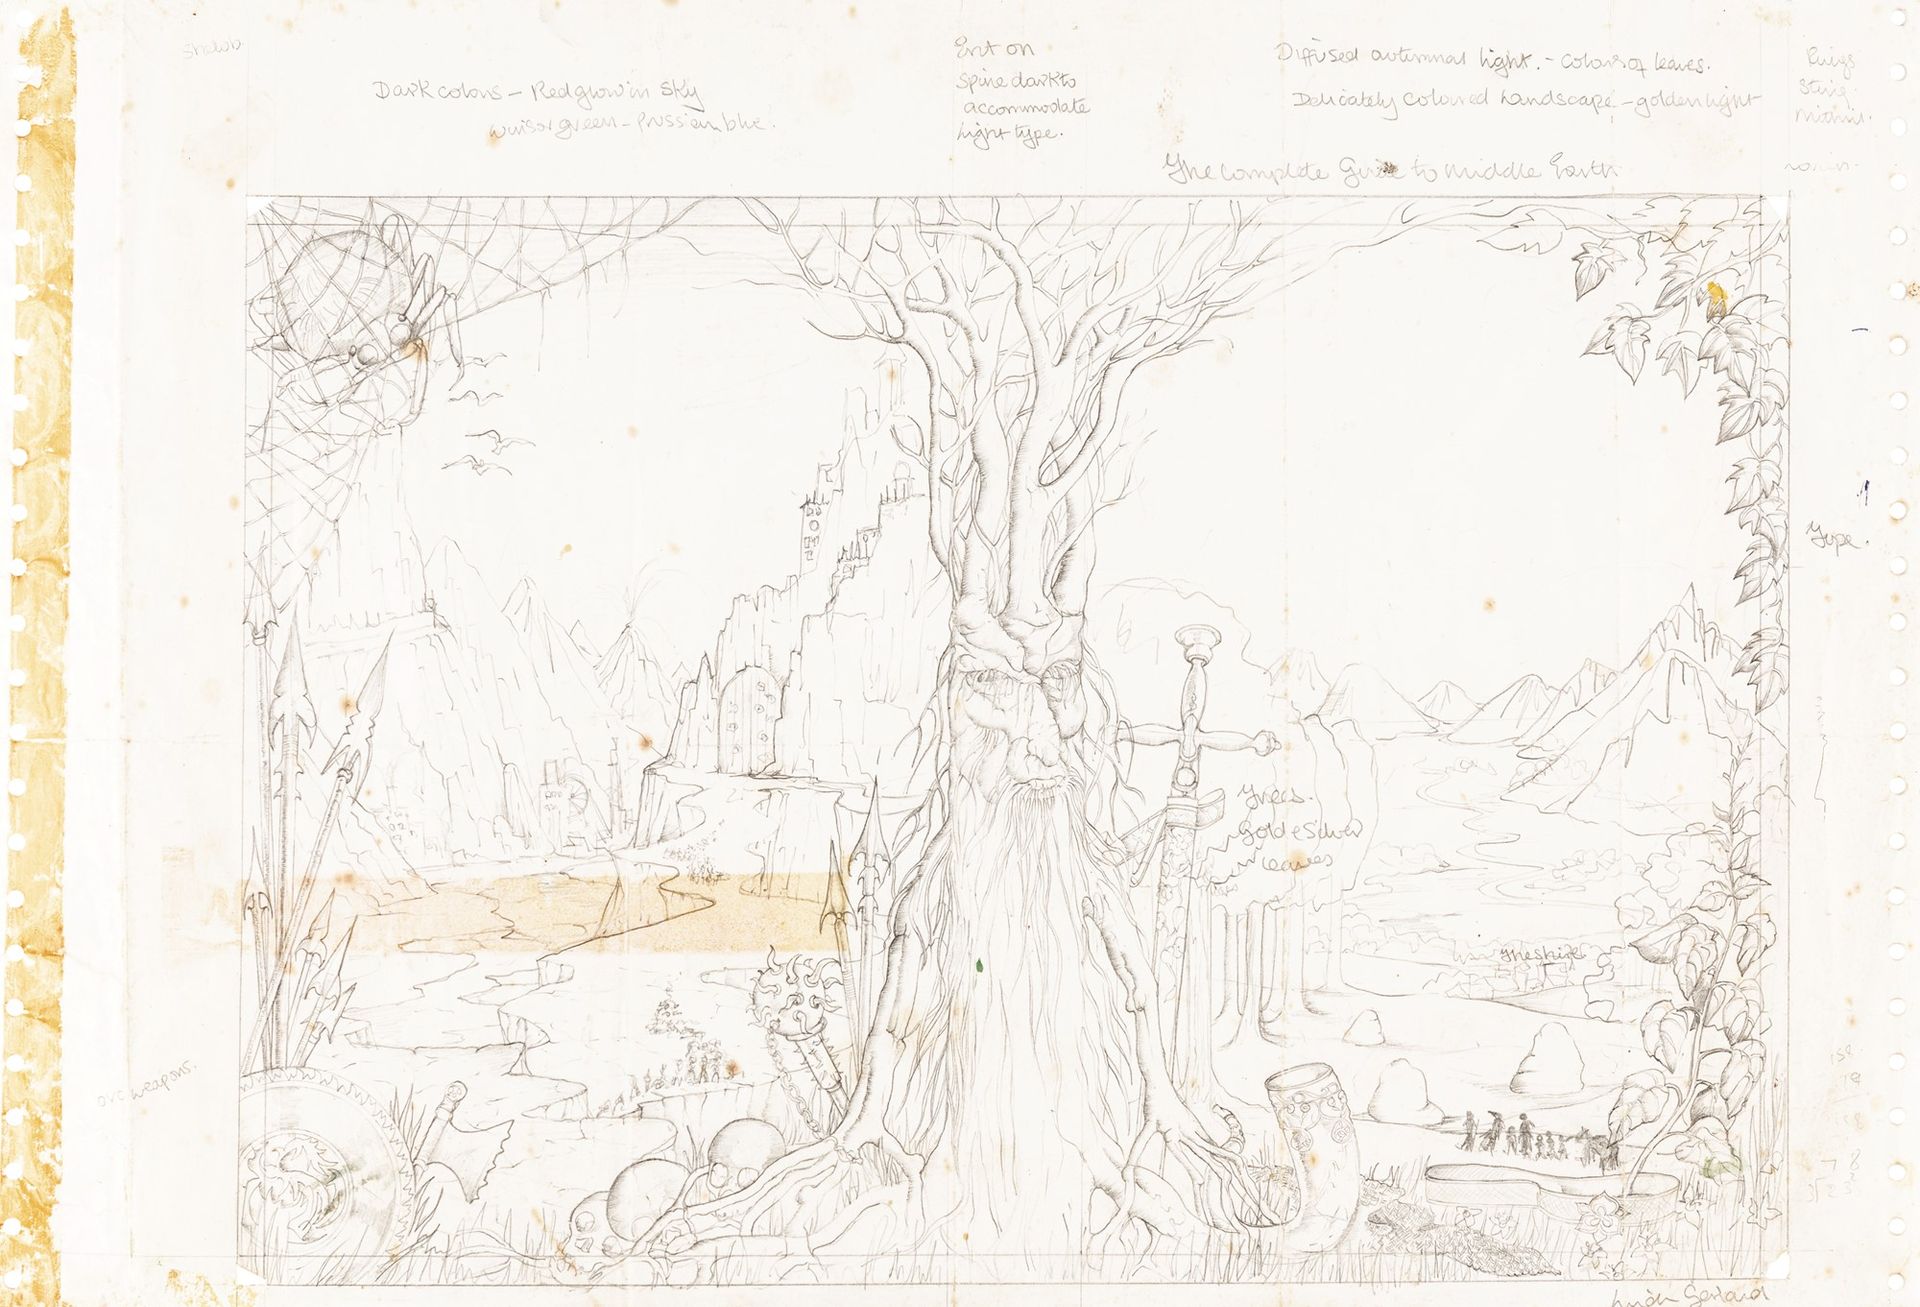 Linda Garland The Complete Guide to Middle-Earth, 1978

pencil on paper
45 x 30,&hellip;